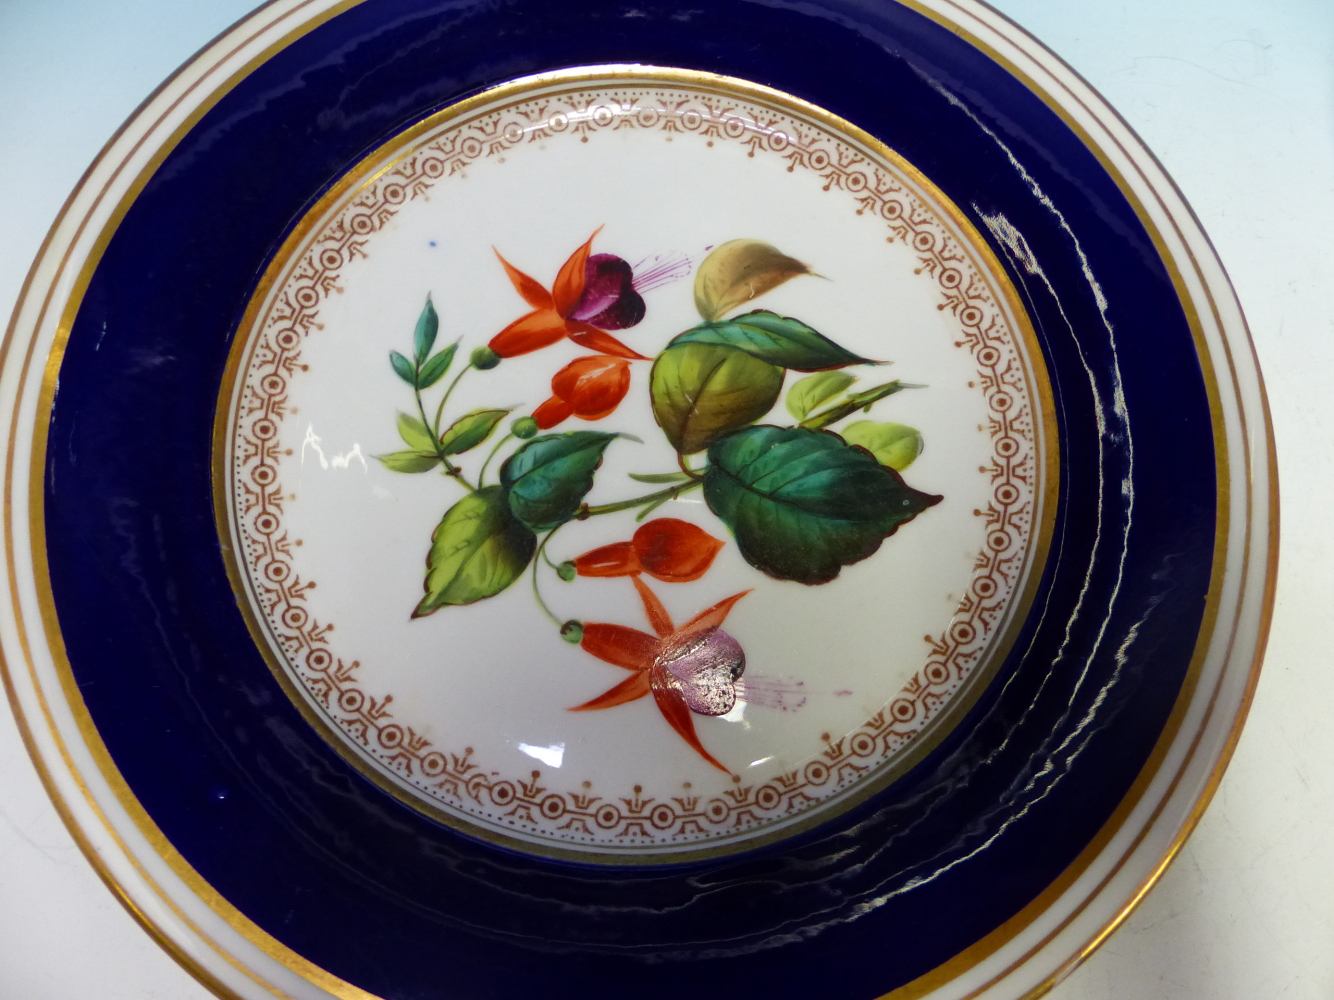 A LATE 19th C. ENGLISH PORCELAIN DESSERT SERVICE, EACH PIECE PRINTED AND PAINTED WITH FLOWERS WITHIN - Image 12 of 18